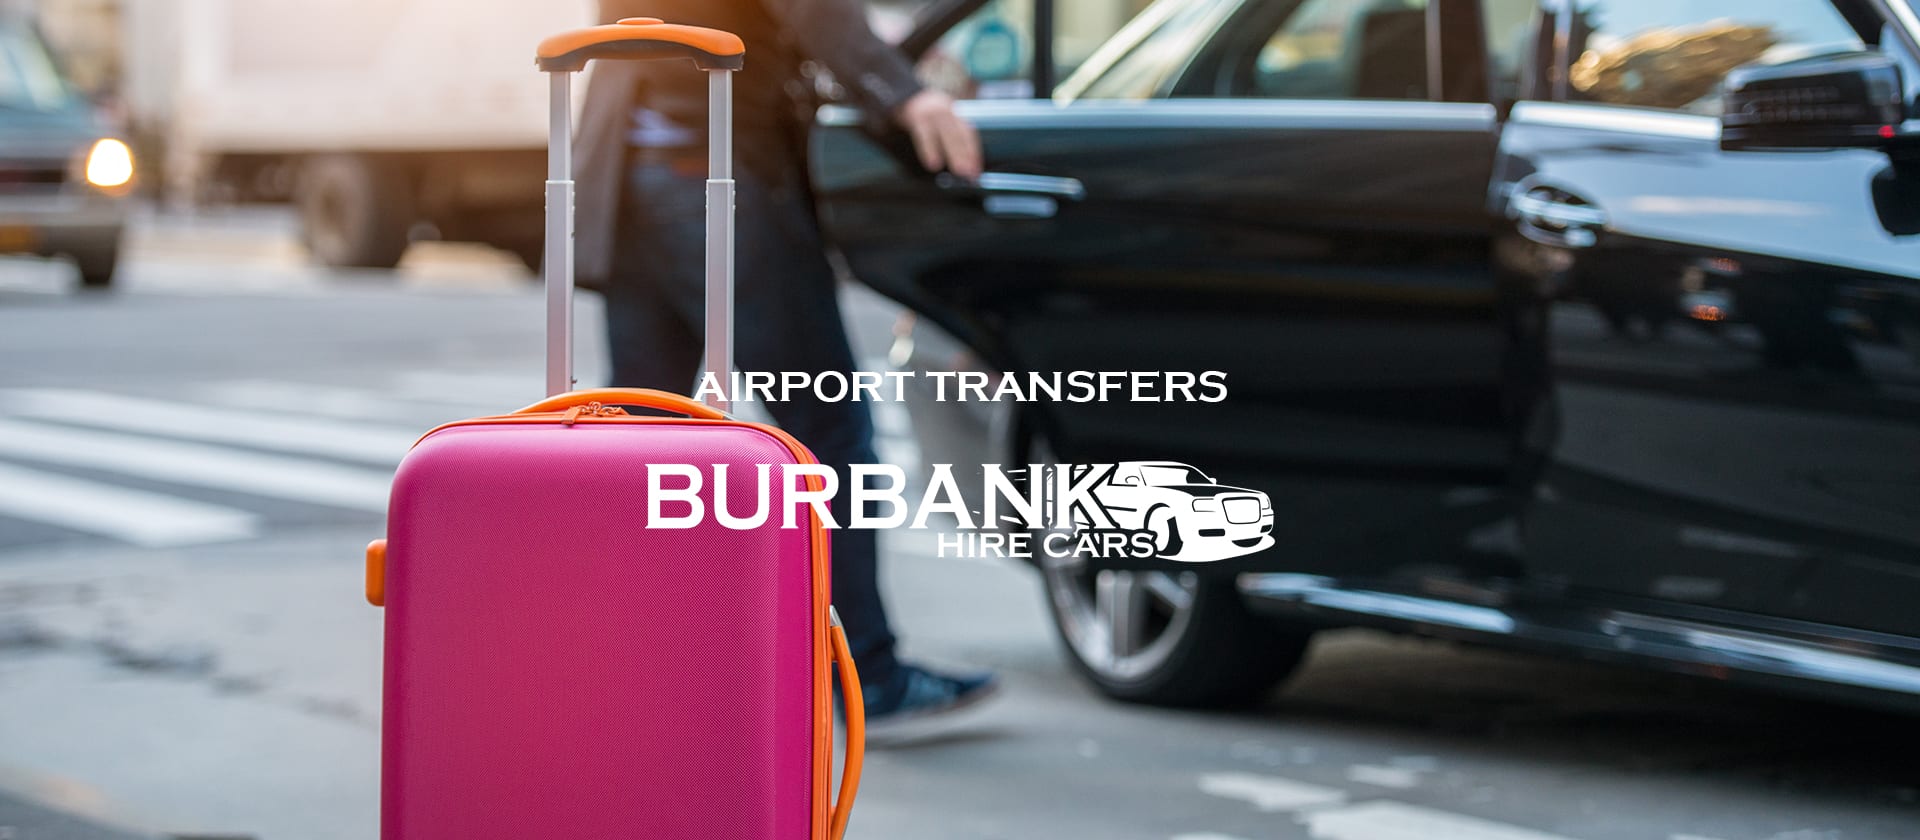 A bright pink suitcase with an orange handle is positioned in the foreground, with a person opening the door of a sleek black car in the background. The text 